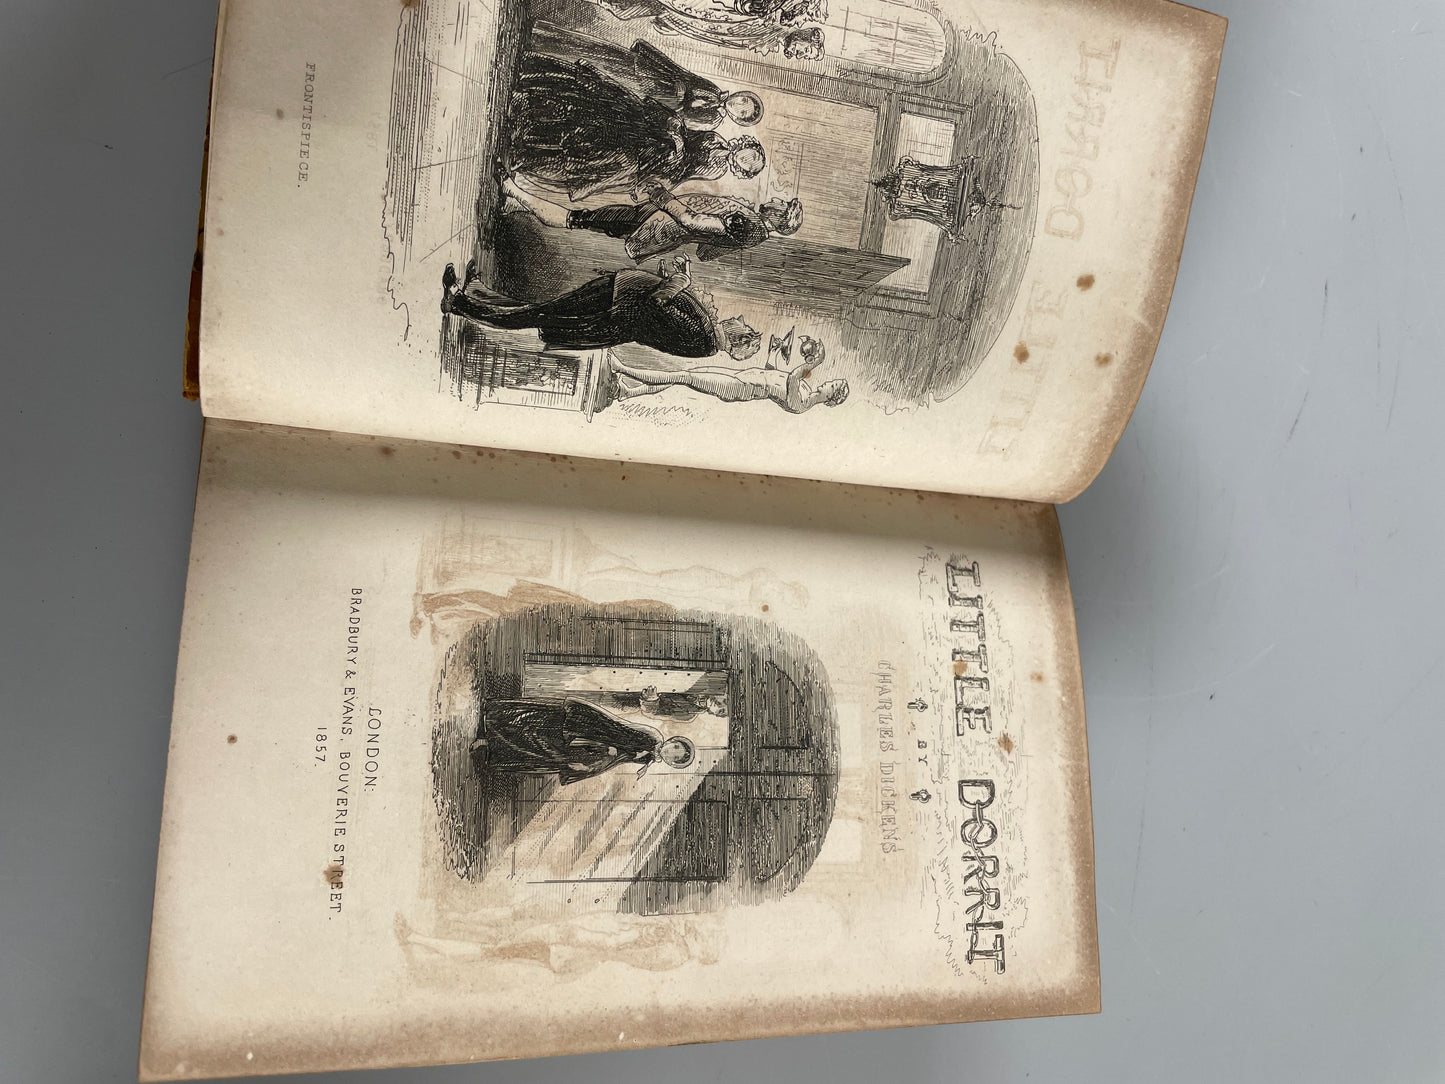 Little Dorrit in Two Volumes by Charles Dickens (1st Book Edition, 1857)